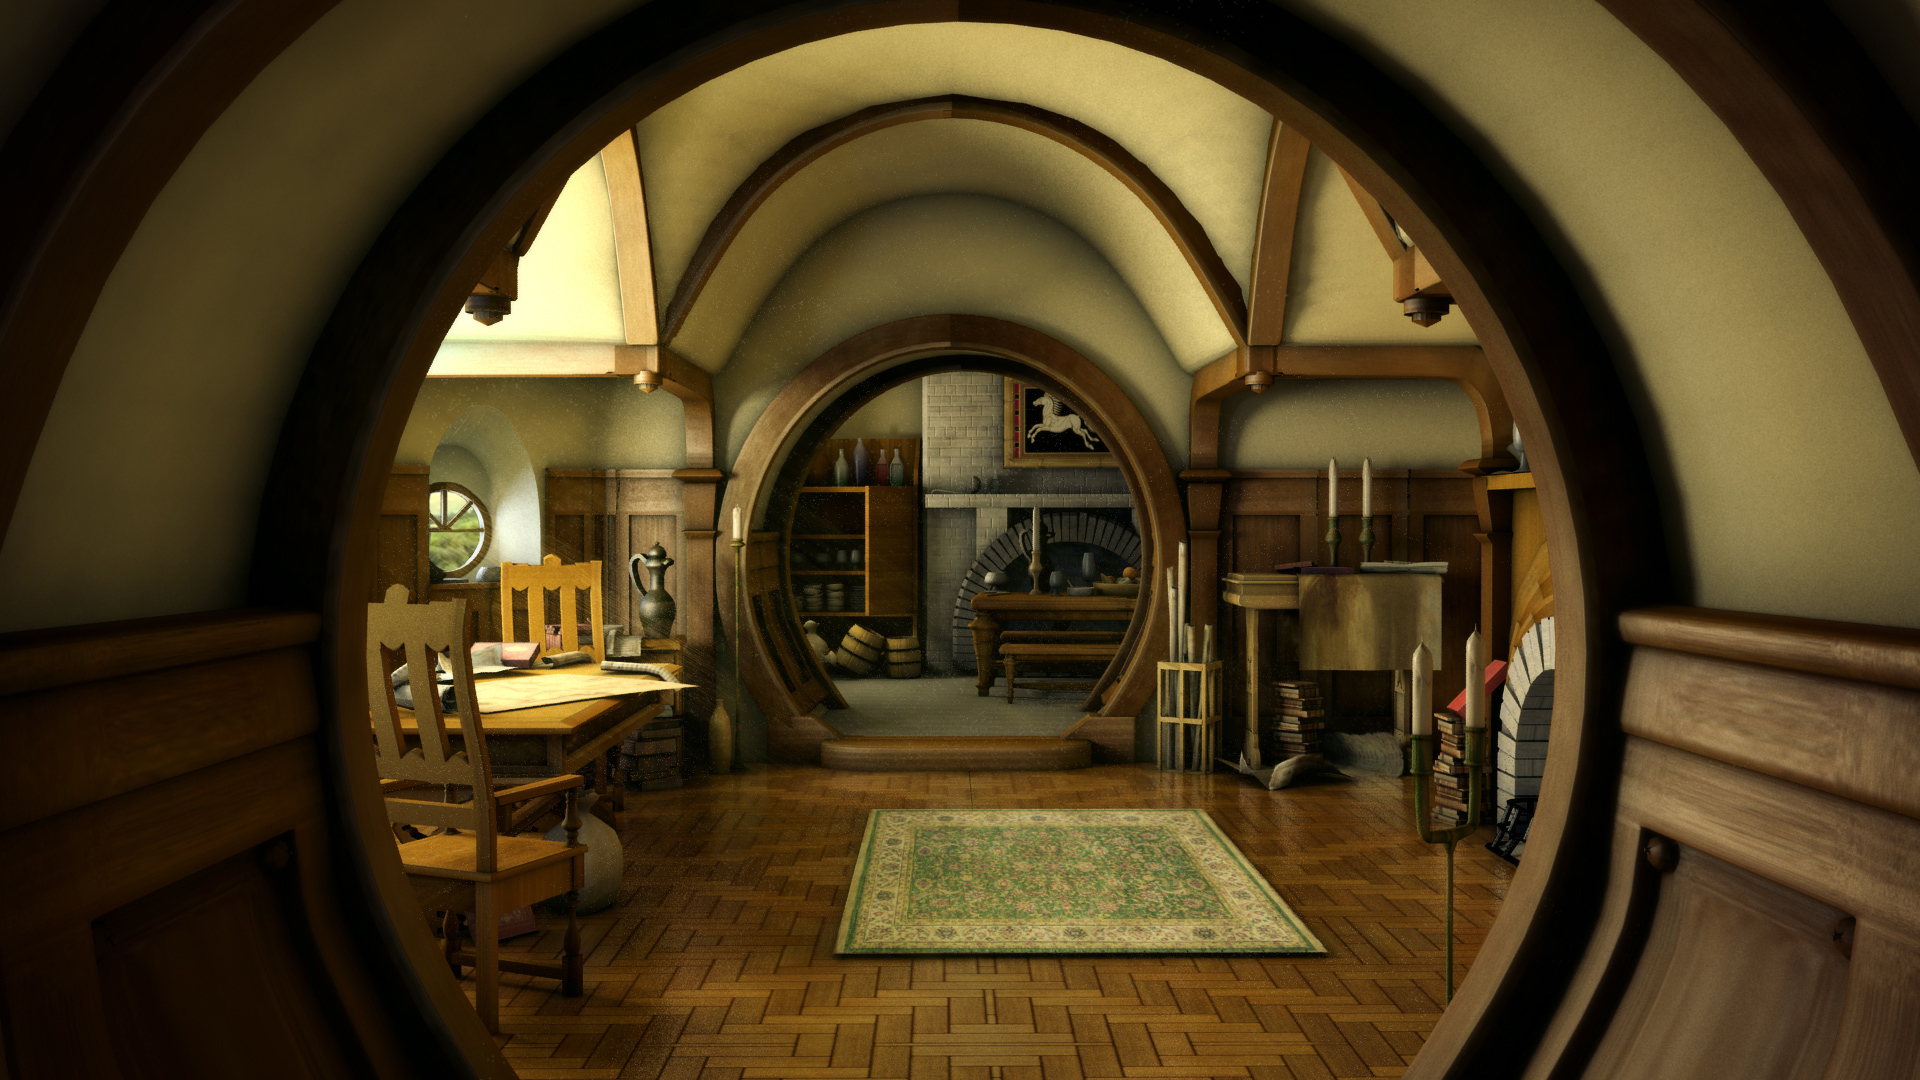 General 1920x1080 room The Lord of the Rings Bag End movies interior Blender